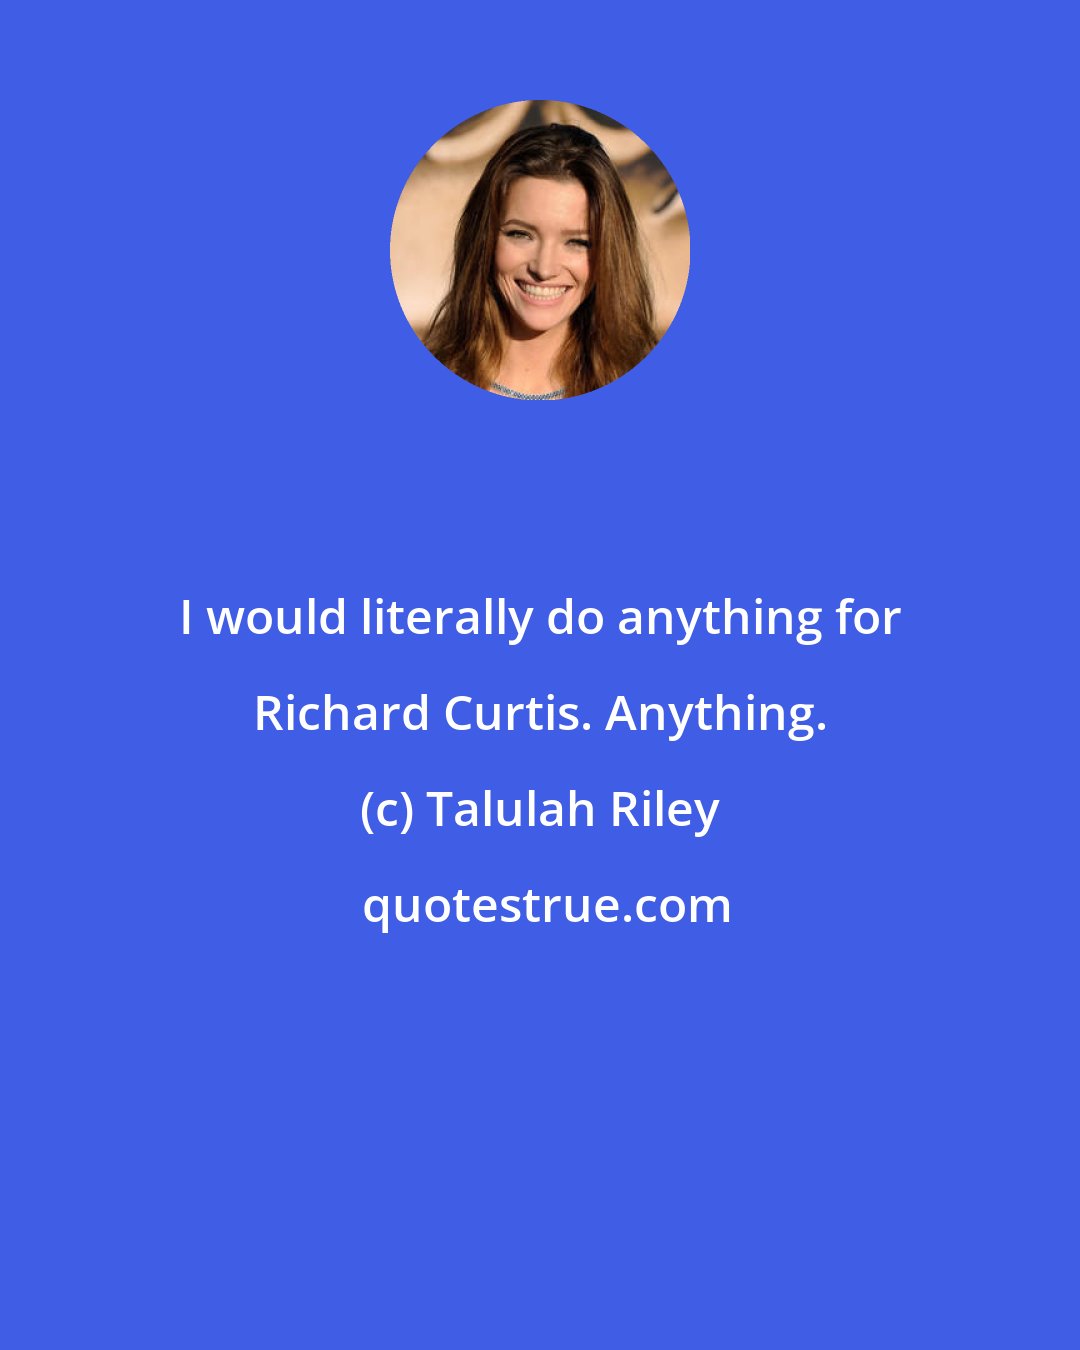 Talulah Riley: I would literally do anything for Richard Curtis. Anything.